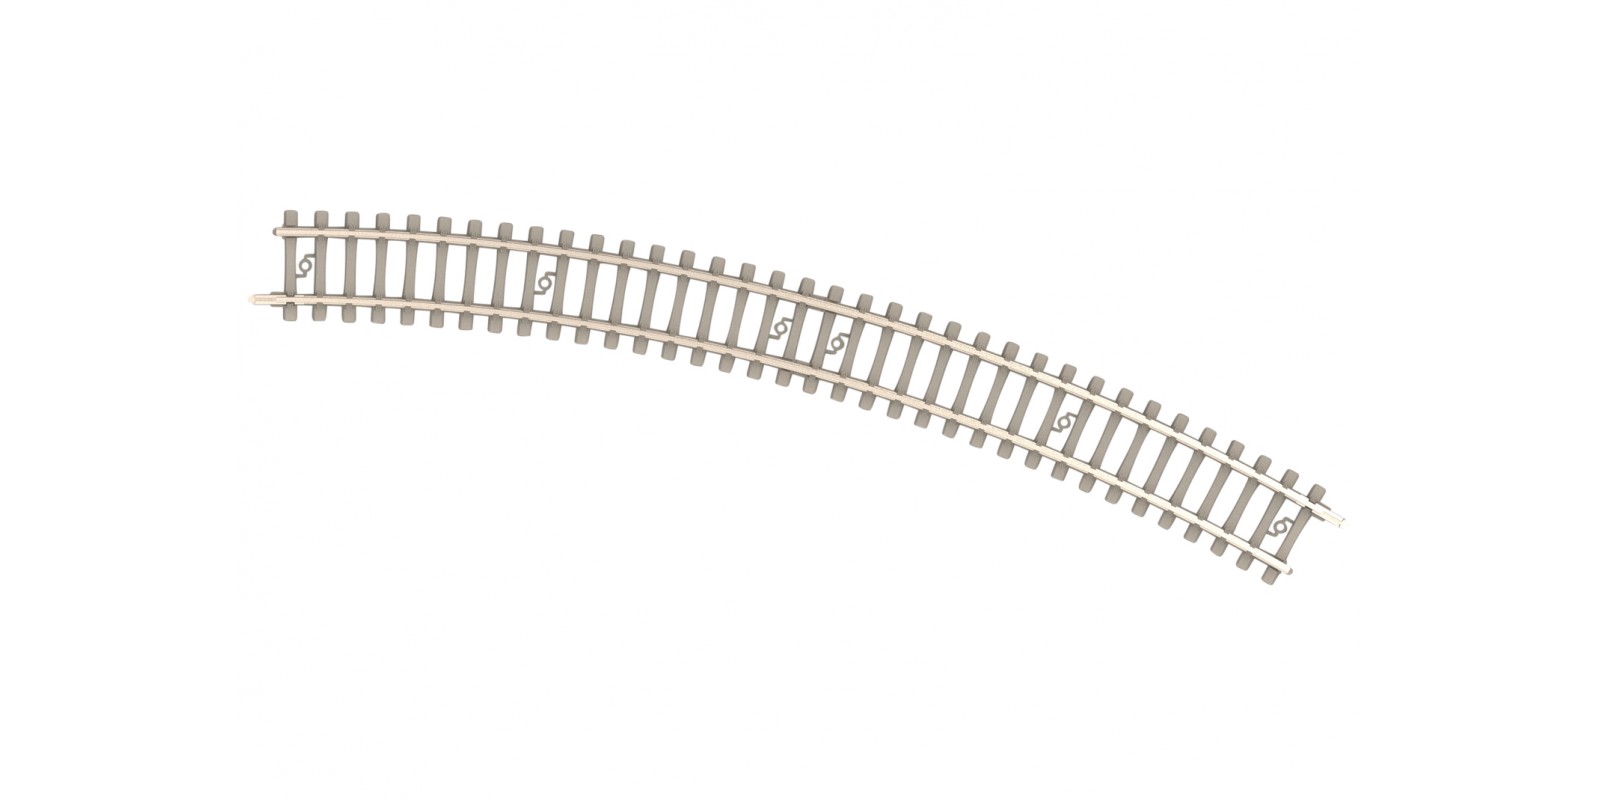 T14520 Curved Track with Concrete Ties